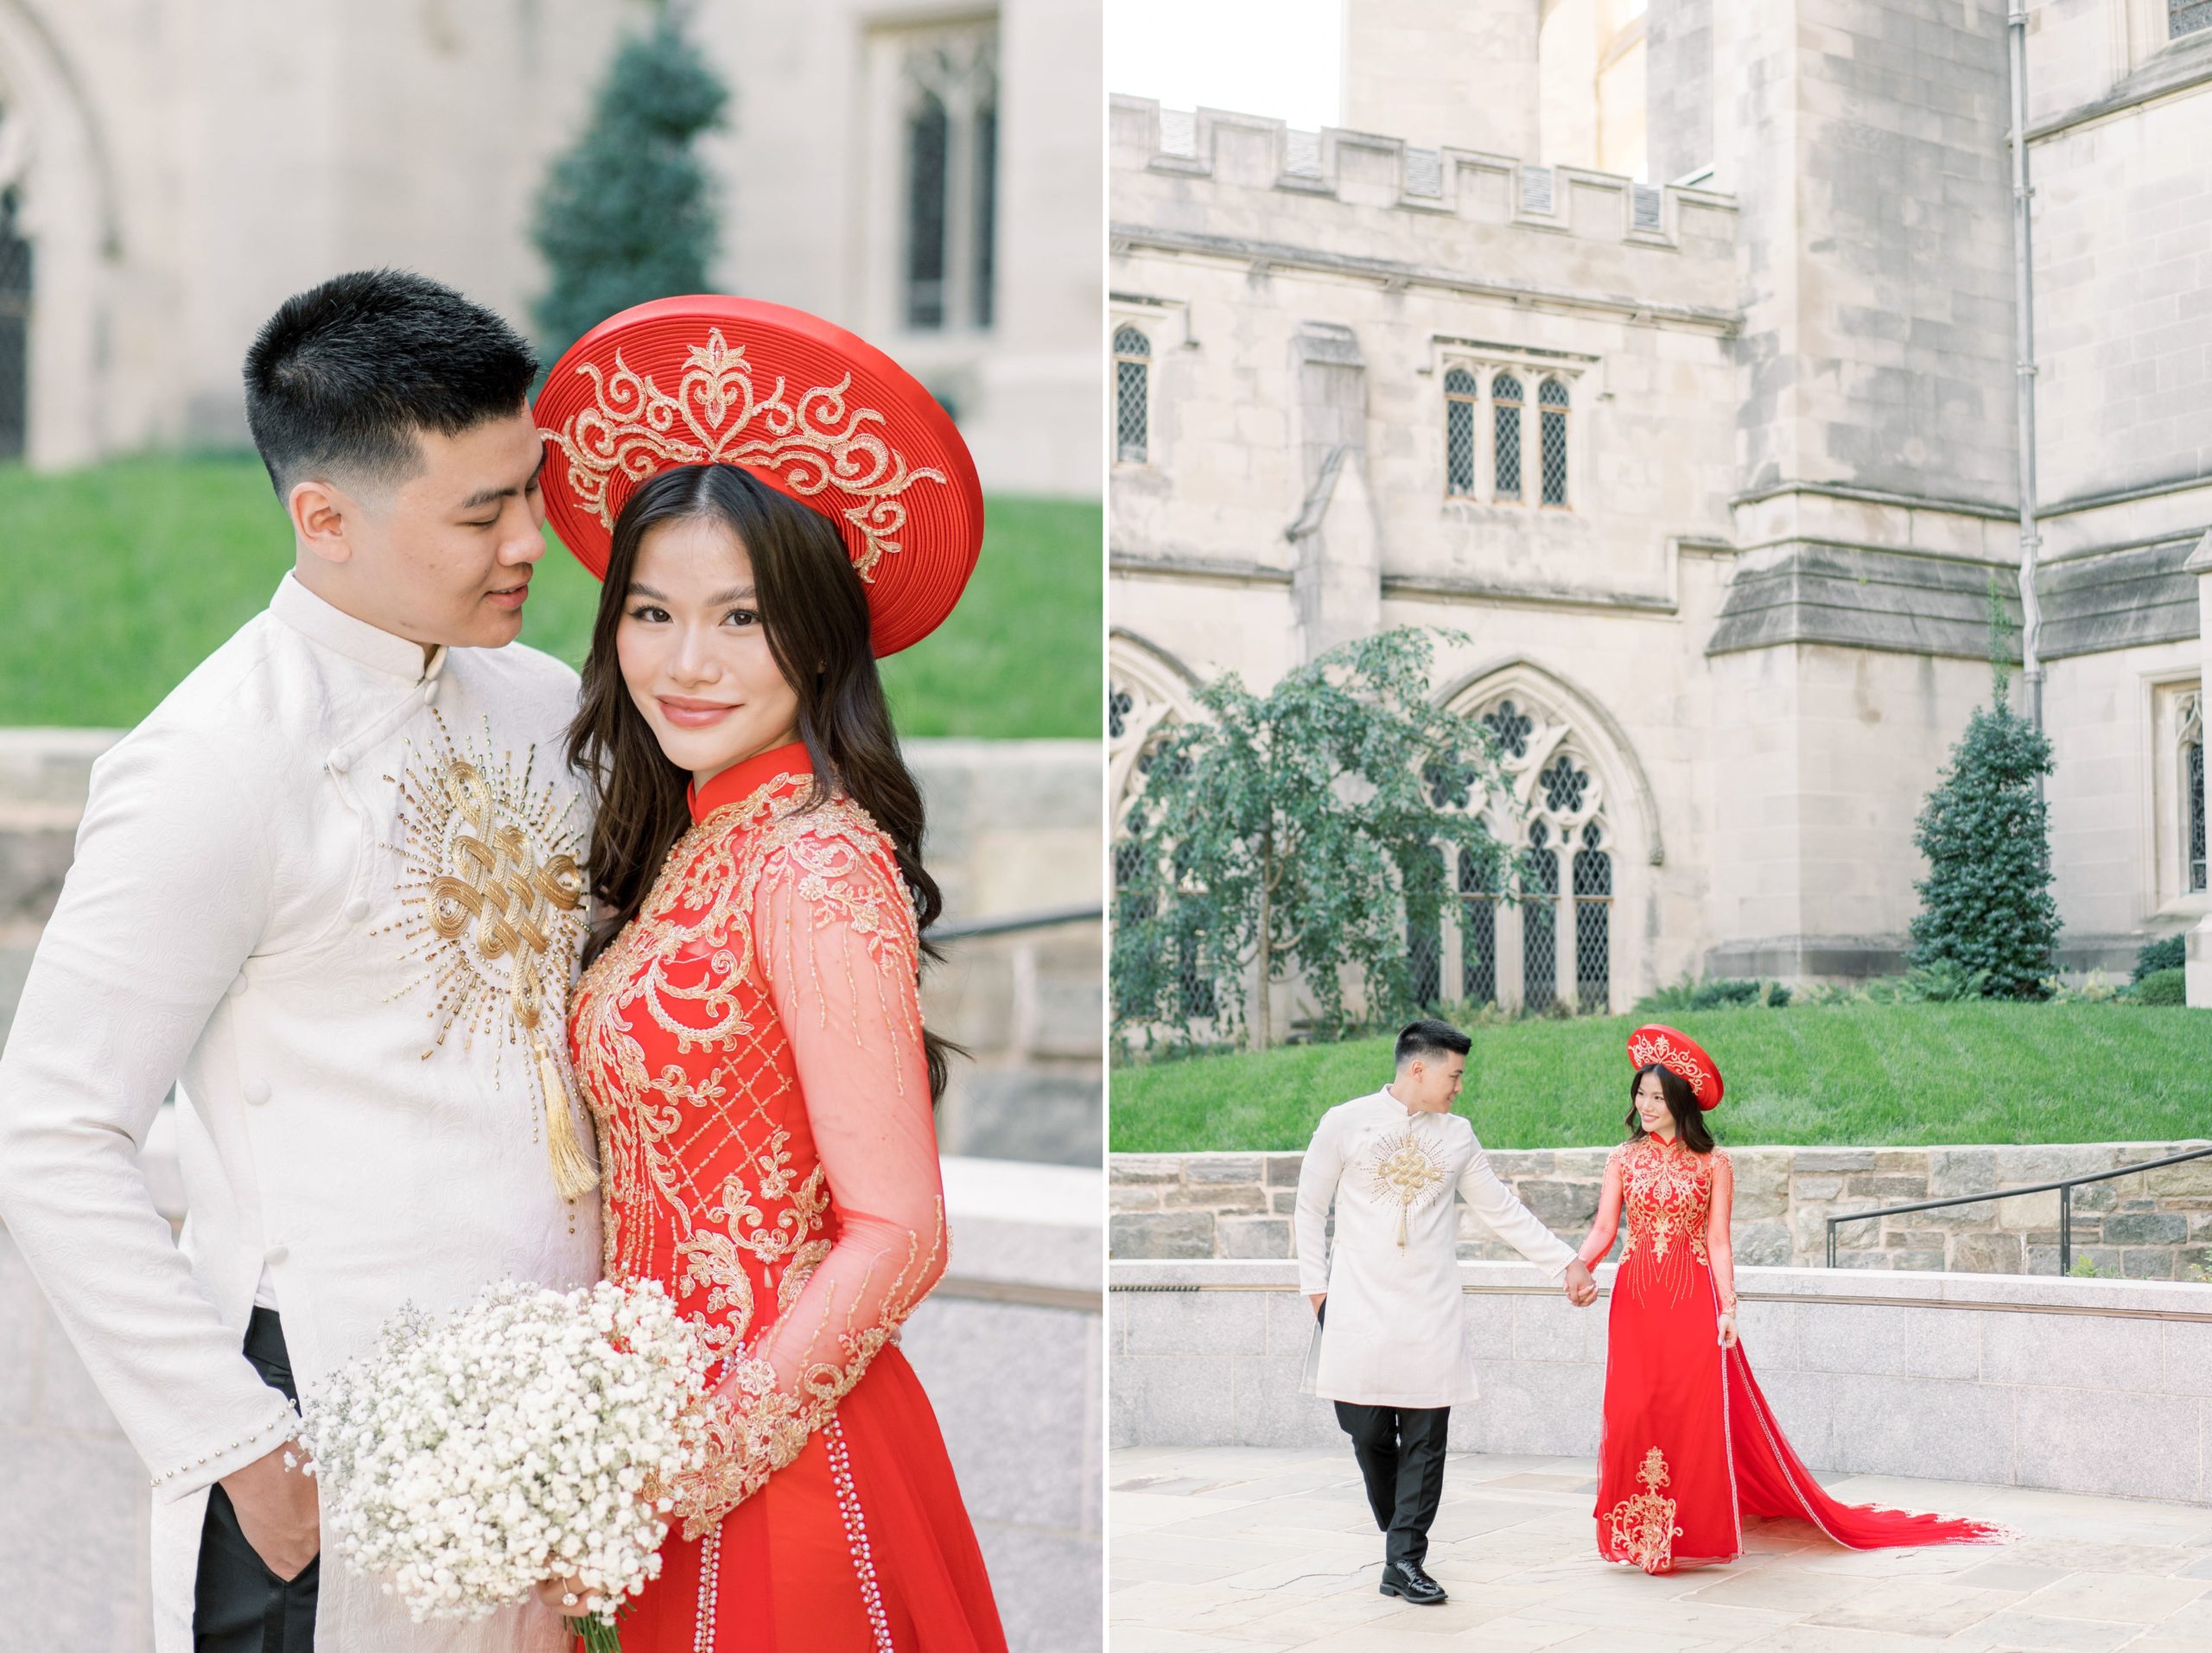 A stunning pre-wedding session in Washington, DC at the historic National Cathedral and the lush Bishop's Garden.